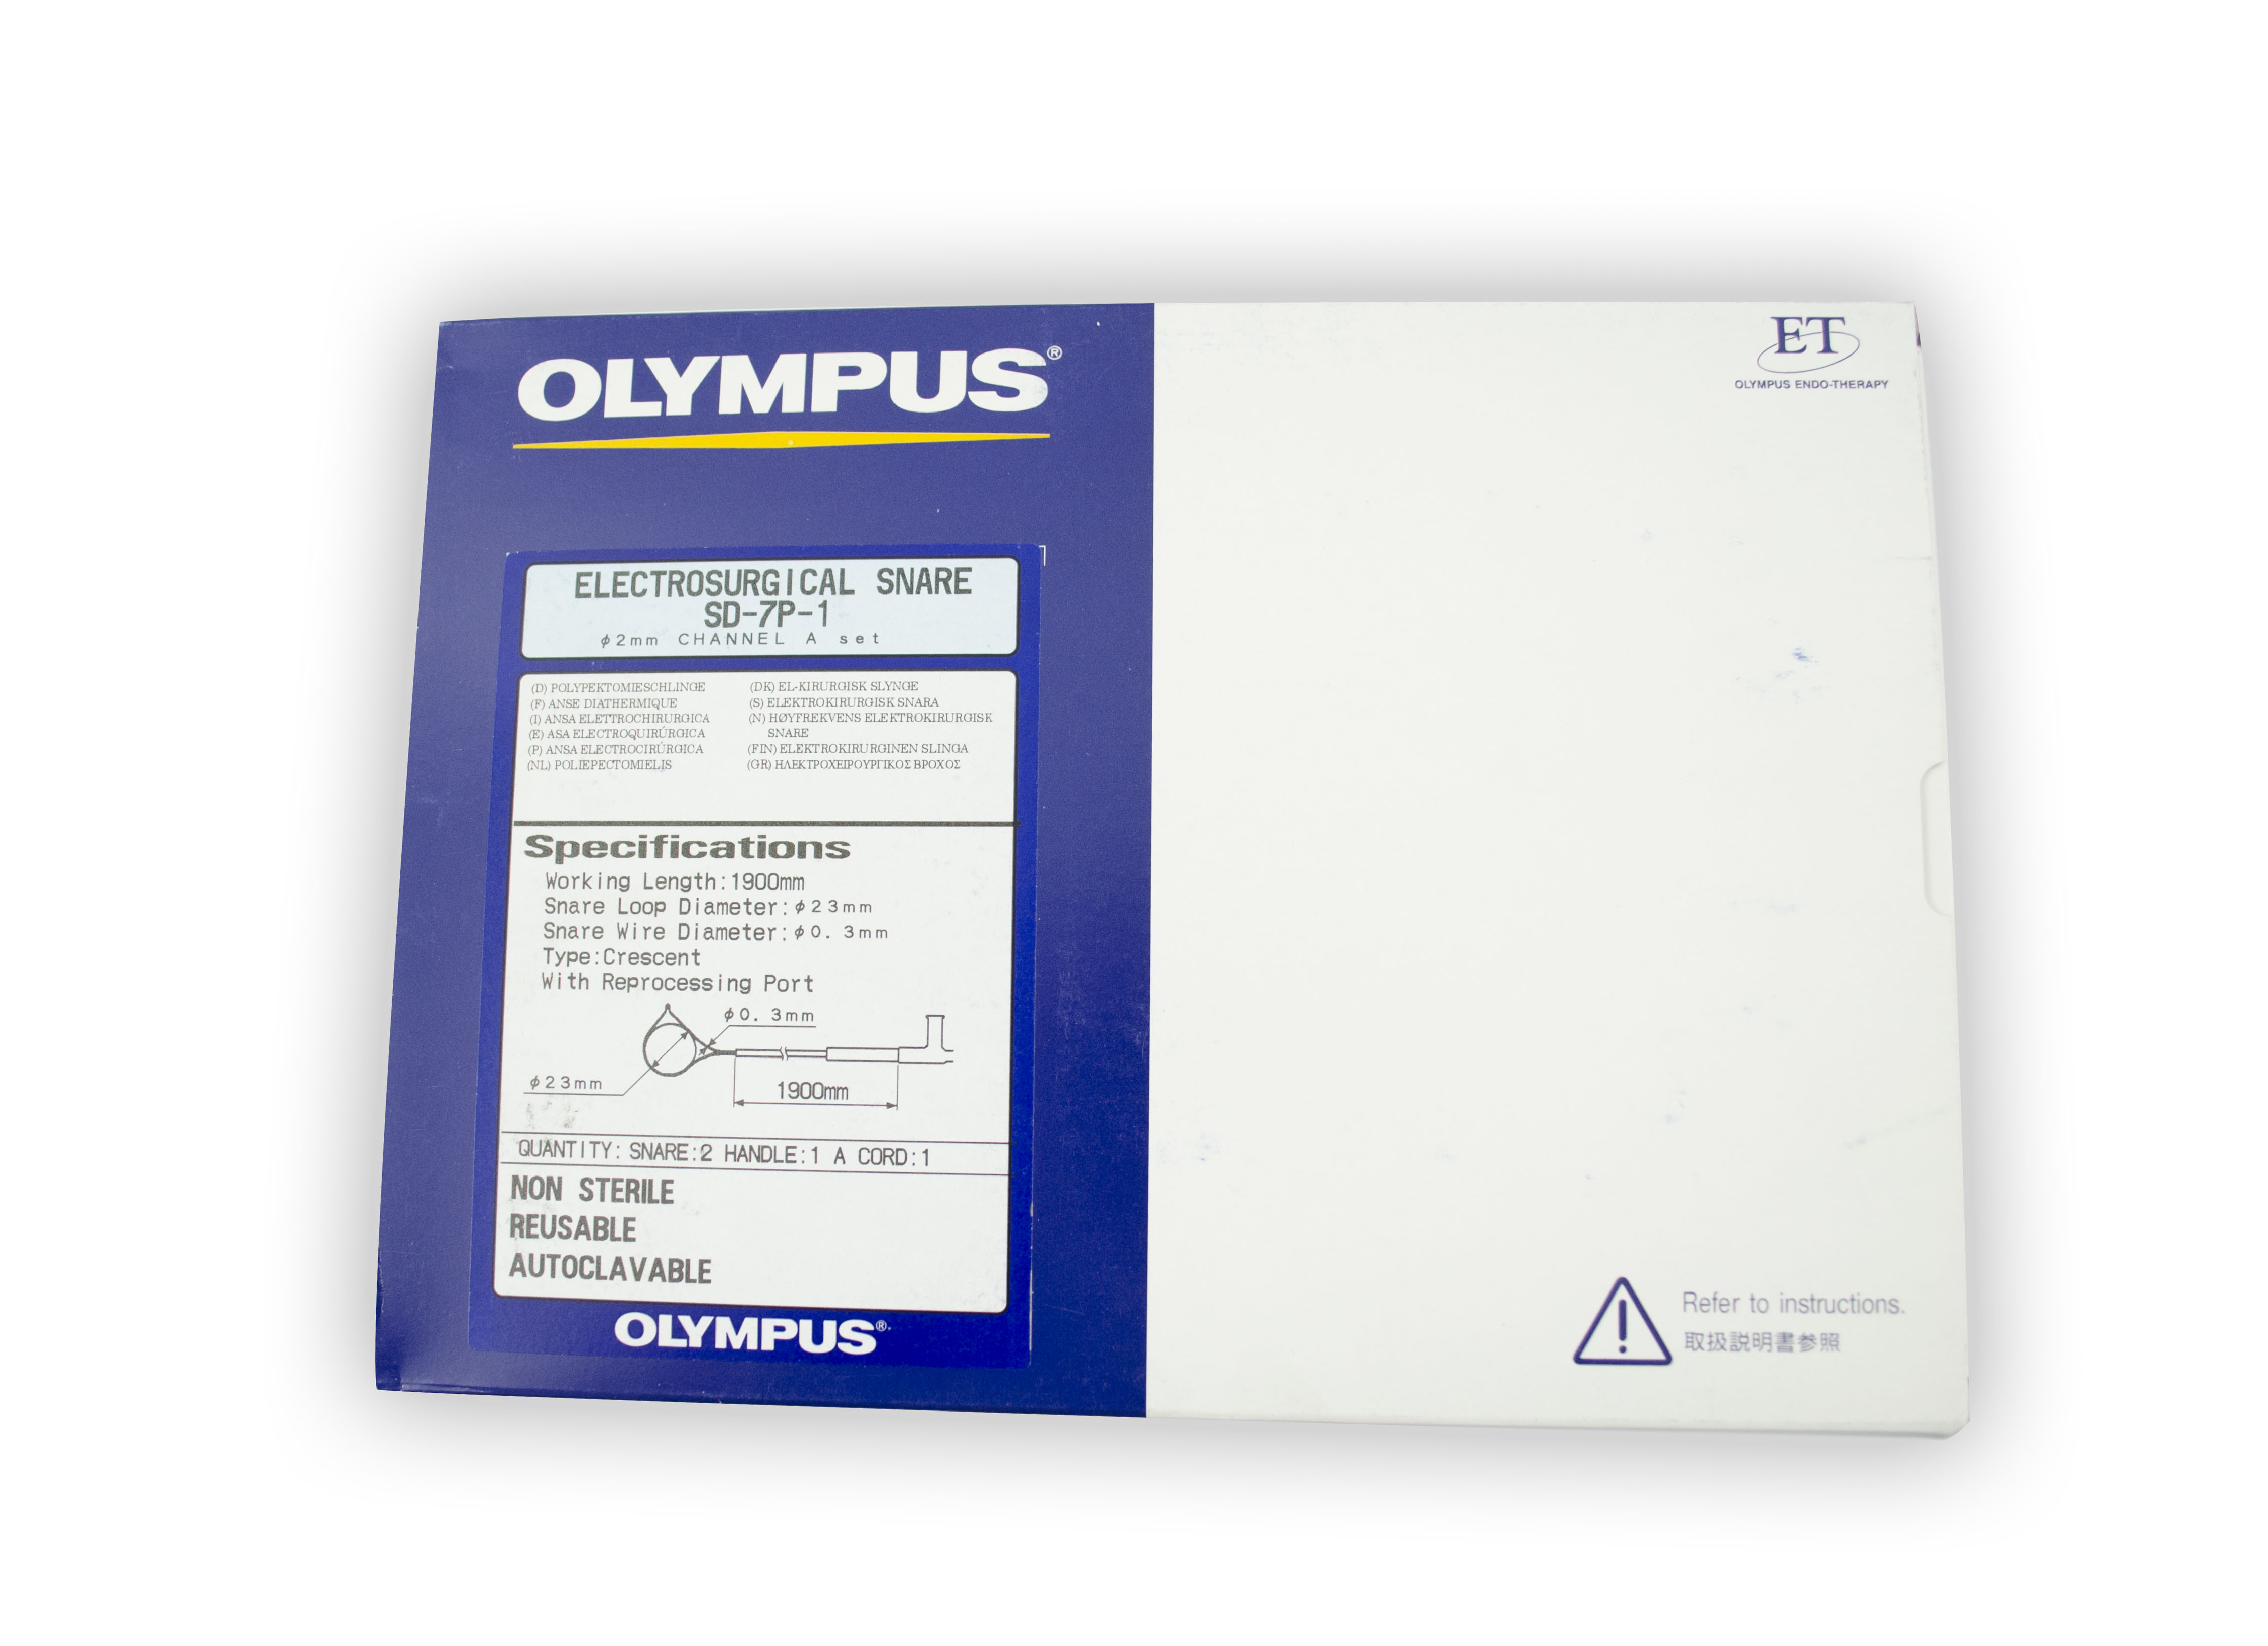 Olympus Reusable Diathermy Snare - SD-7P-1 (2 Snares, 1 Handle, 1 A Cord)